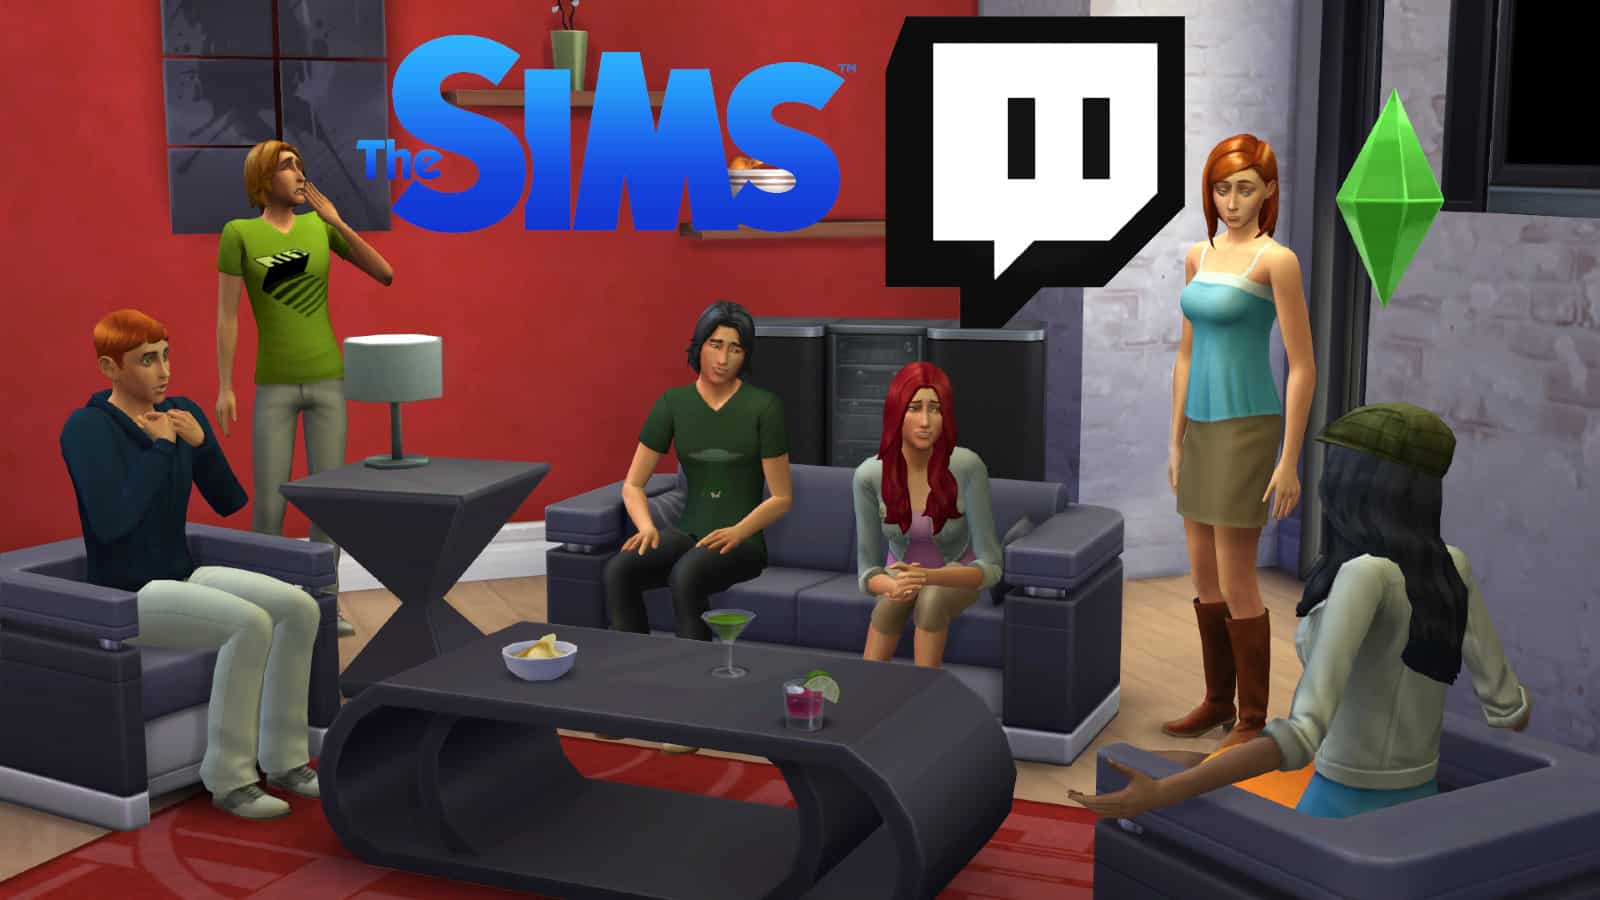 The Sims on Twitch